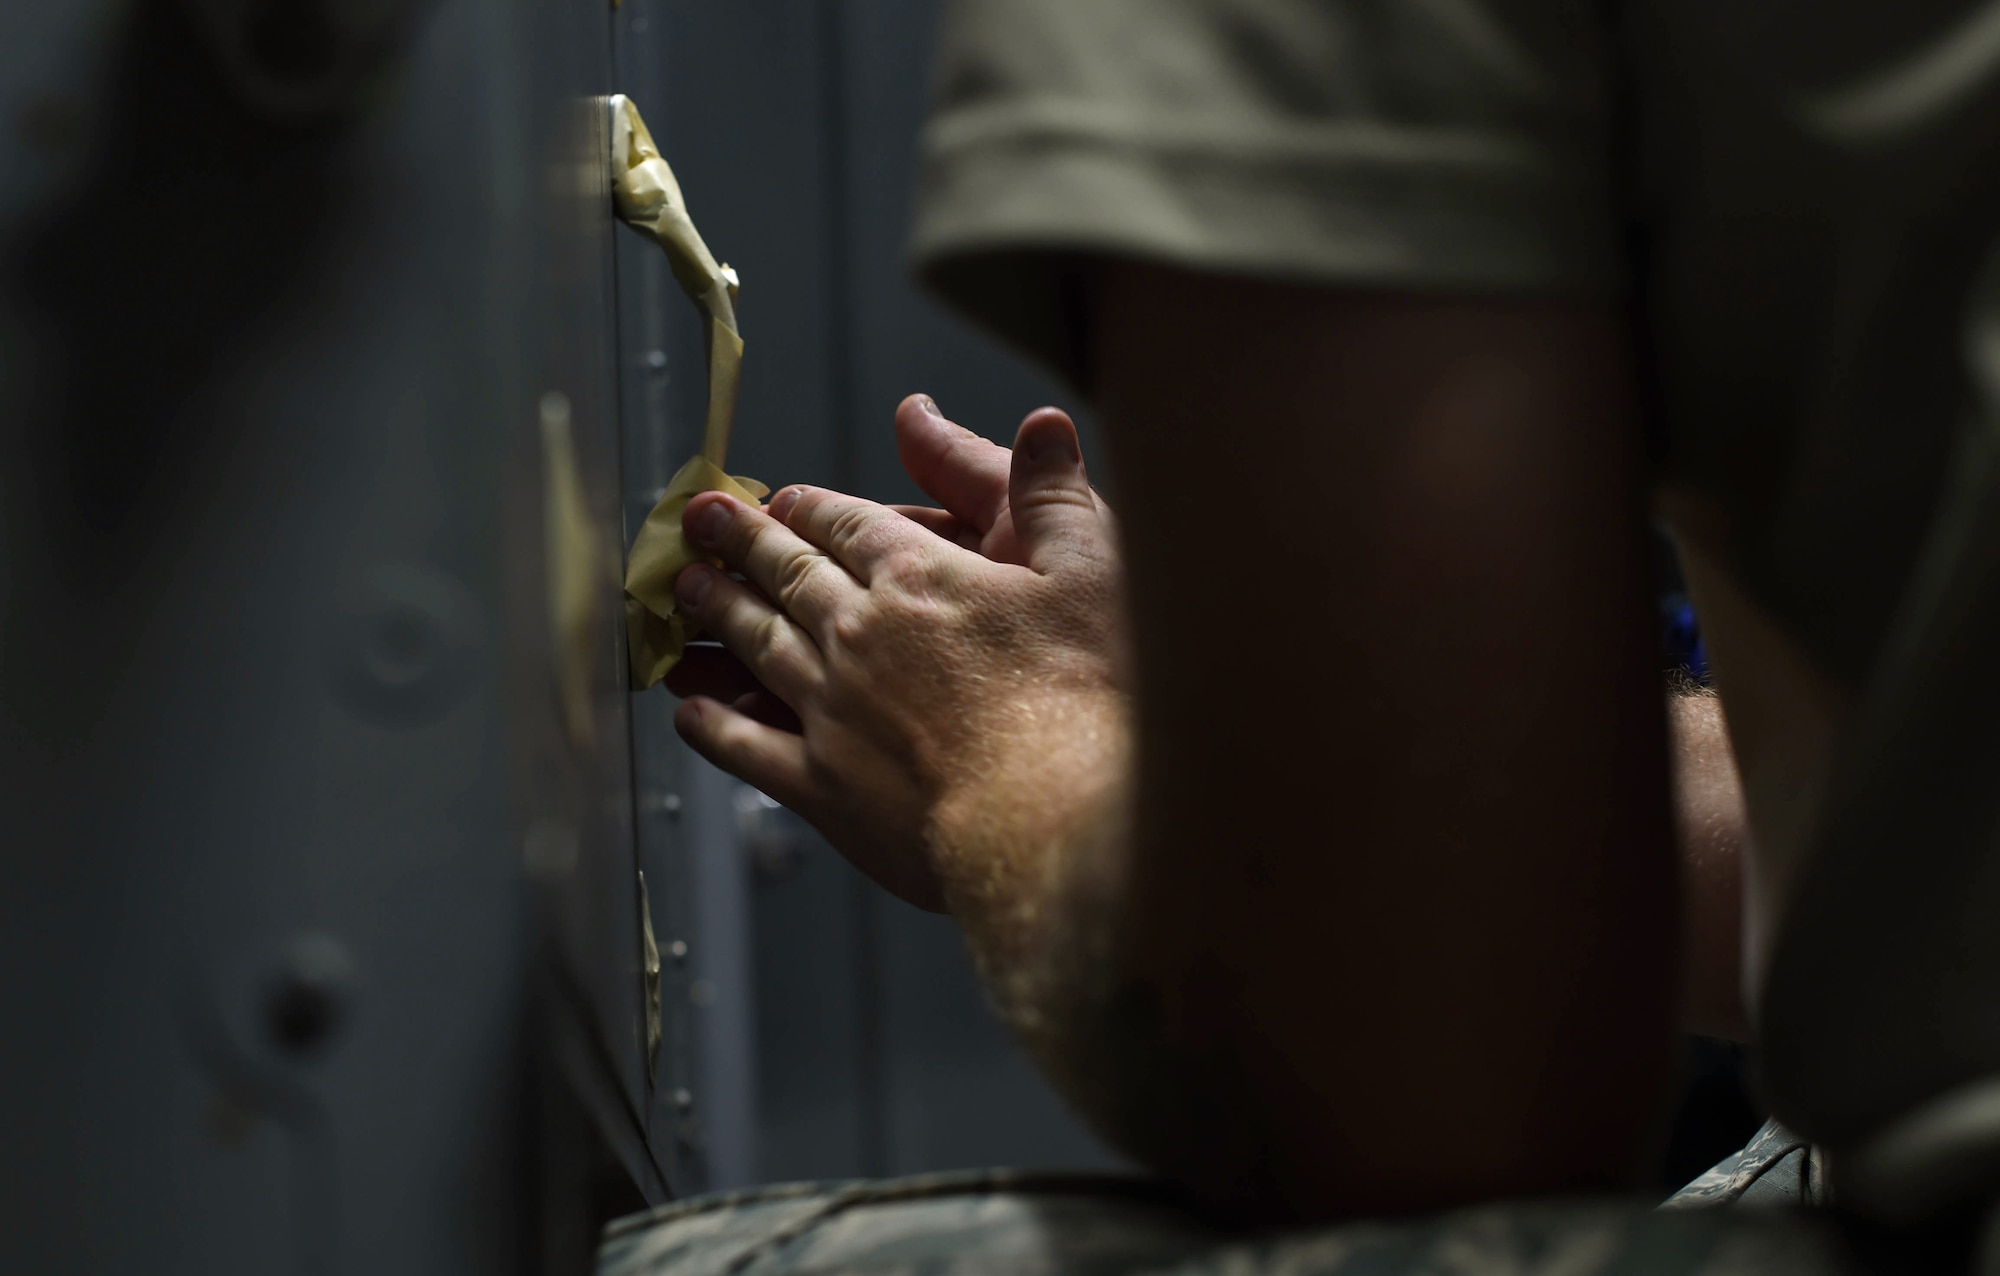 Staff Sgt. Cody Lange, 60th Maintenance Squadron aircraft structural maintenance technician, applies masking tape to certain areas before painting the inside of a C-17 Globemaster III from Travis Air Force Base, Calif., Aug. 6, 2018, at Joint Base Lewis-McChord, Wash. Travis and McChord Airmen are trying to build a partnership where Travis C-17s are painted in McChord’s paint barn. (U.S. Air Force photo by Senior Airman Tryphena Mayhugh)